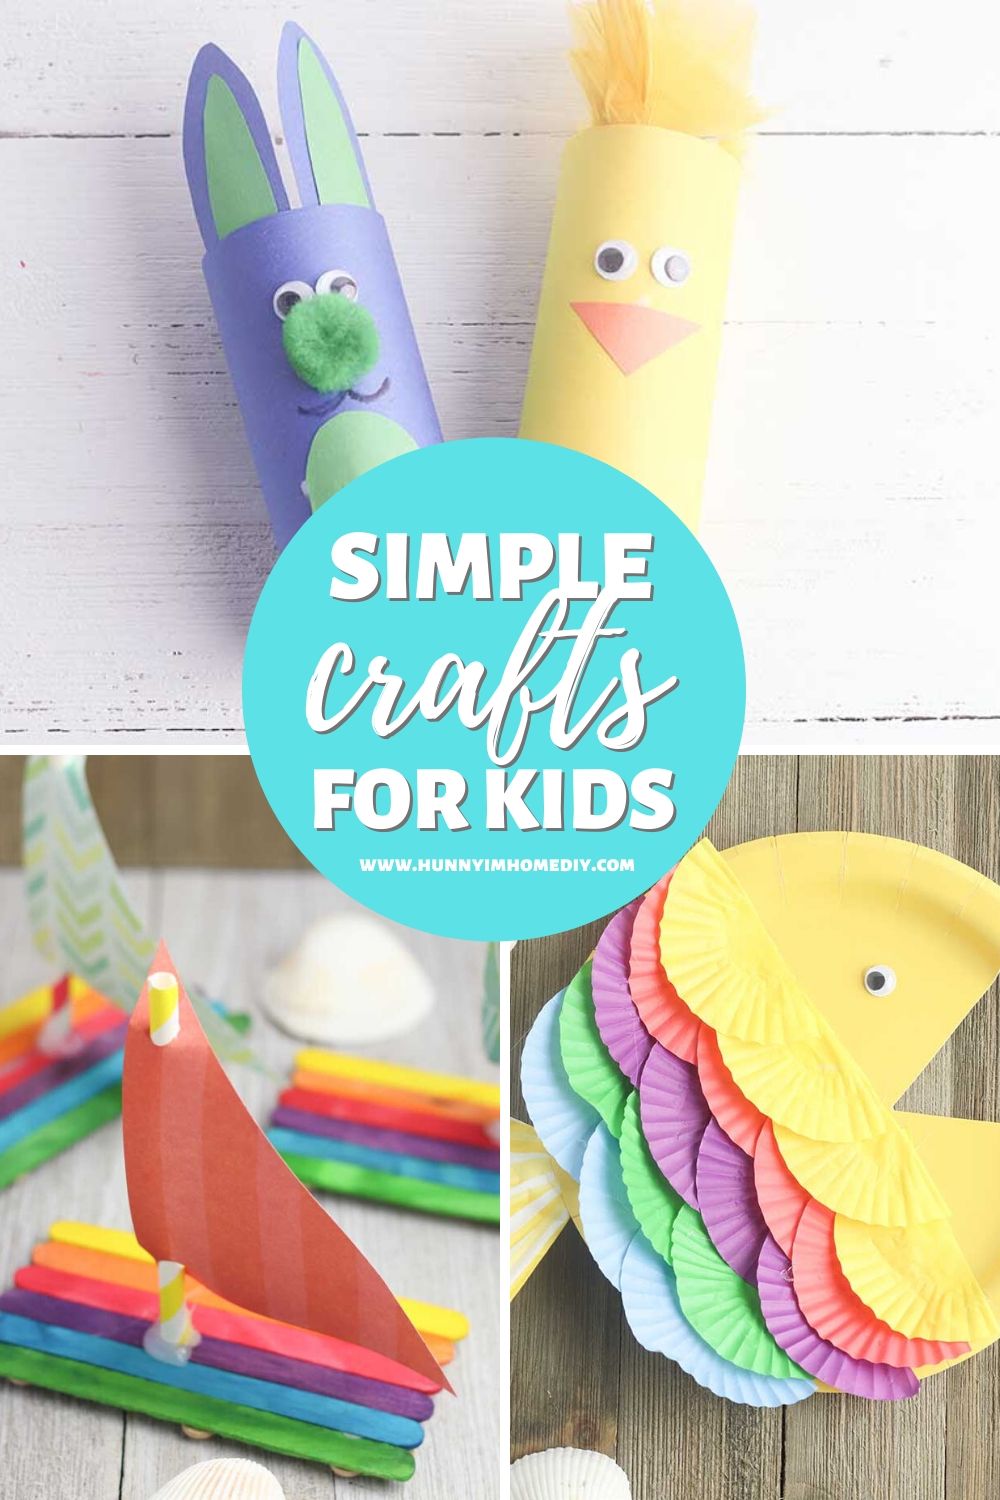 Quick and Easy Simple Crafts for Kids | Hunny I'm Home